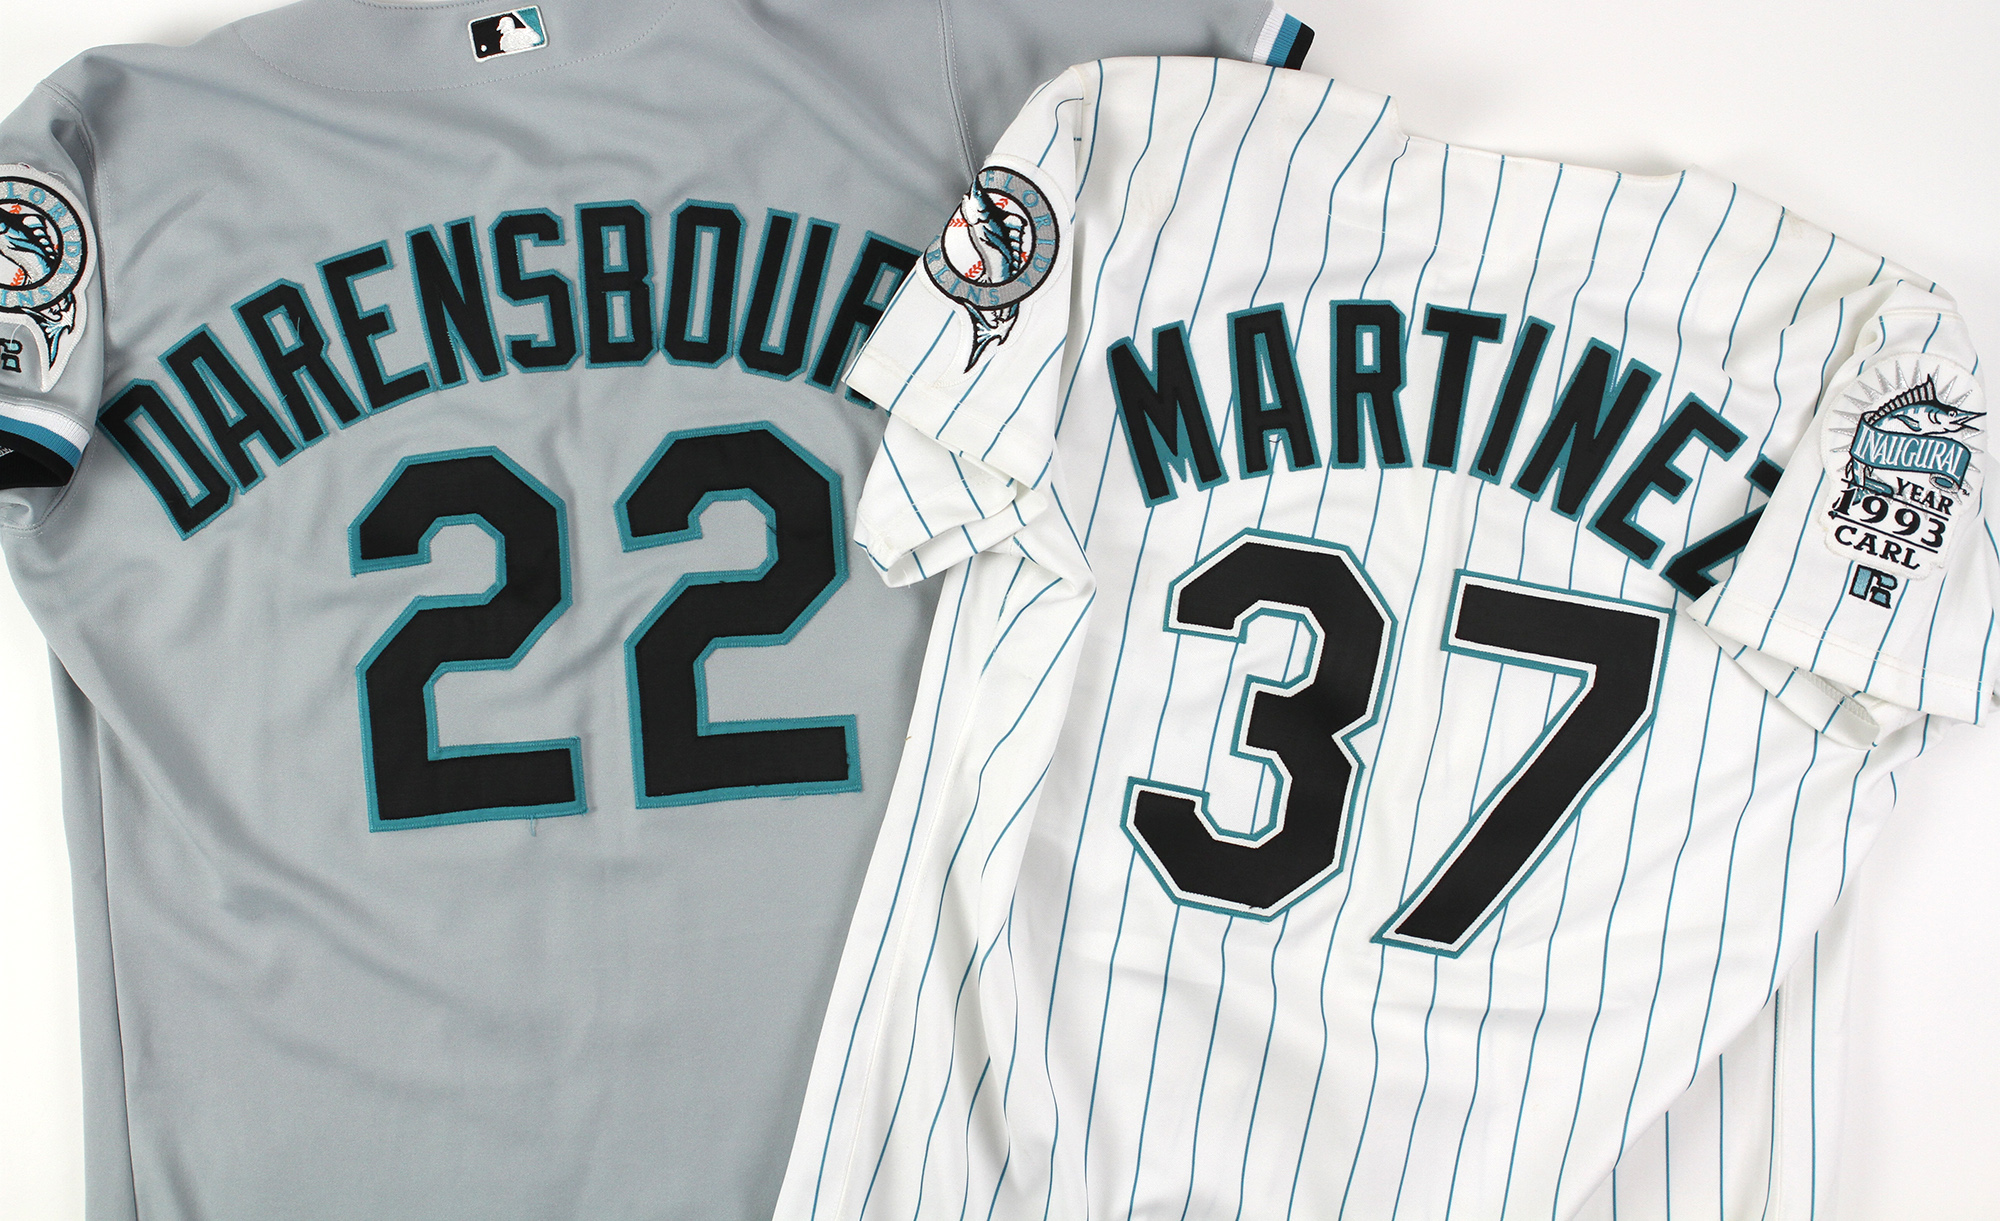 Florida Marlins Authentic Game Worn 1993 Inaugural Jersey